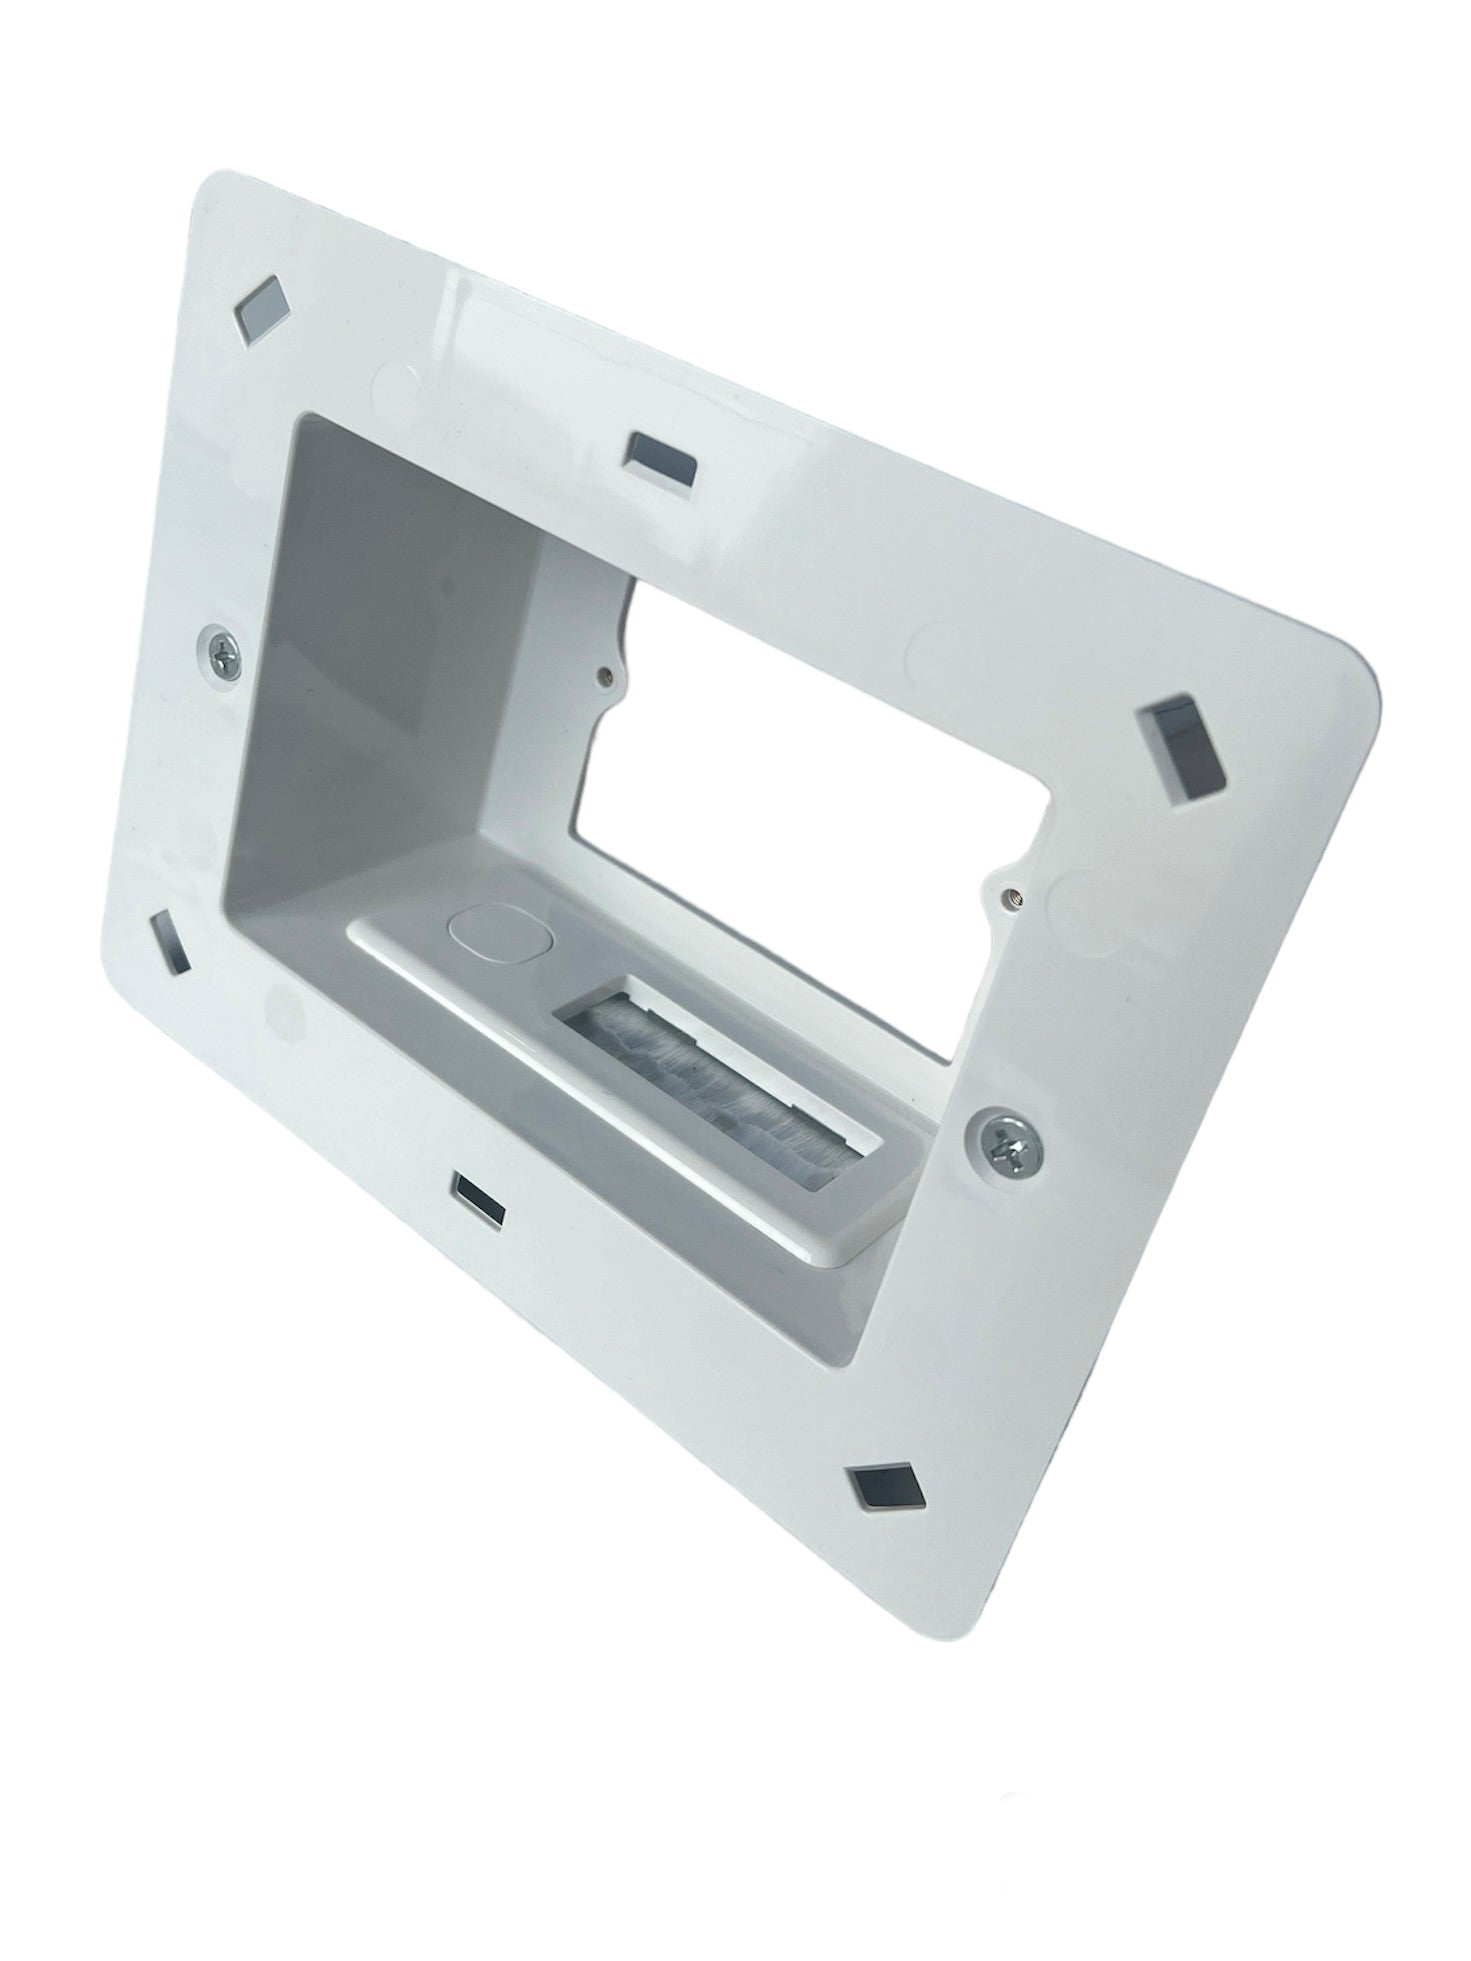 Recessed Wall Plate Box With Keystone + Brush Cover